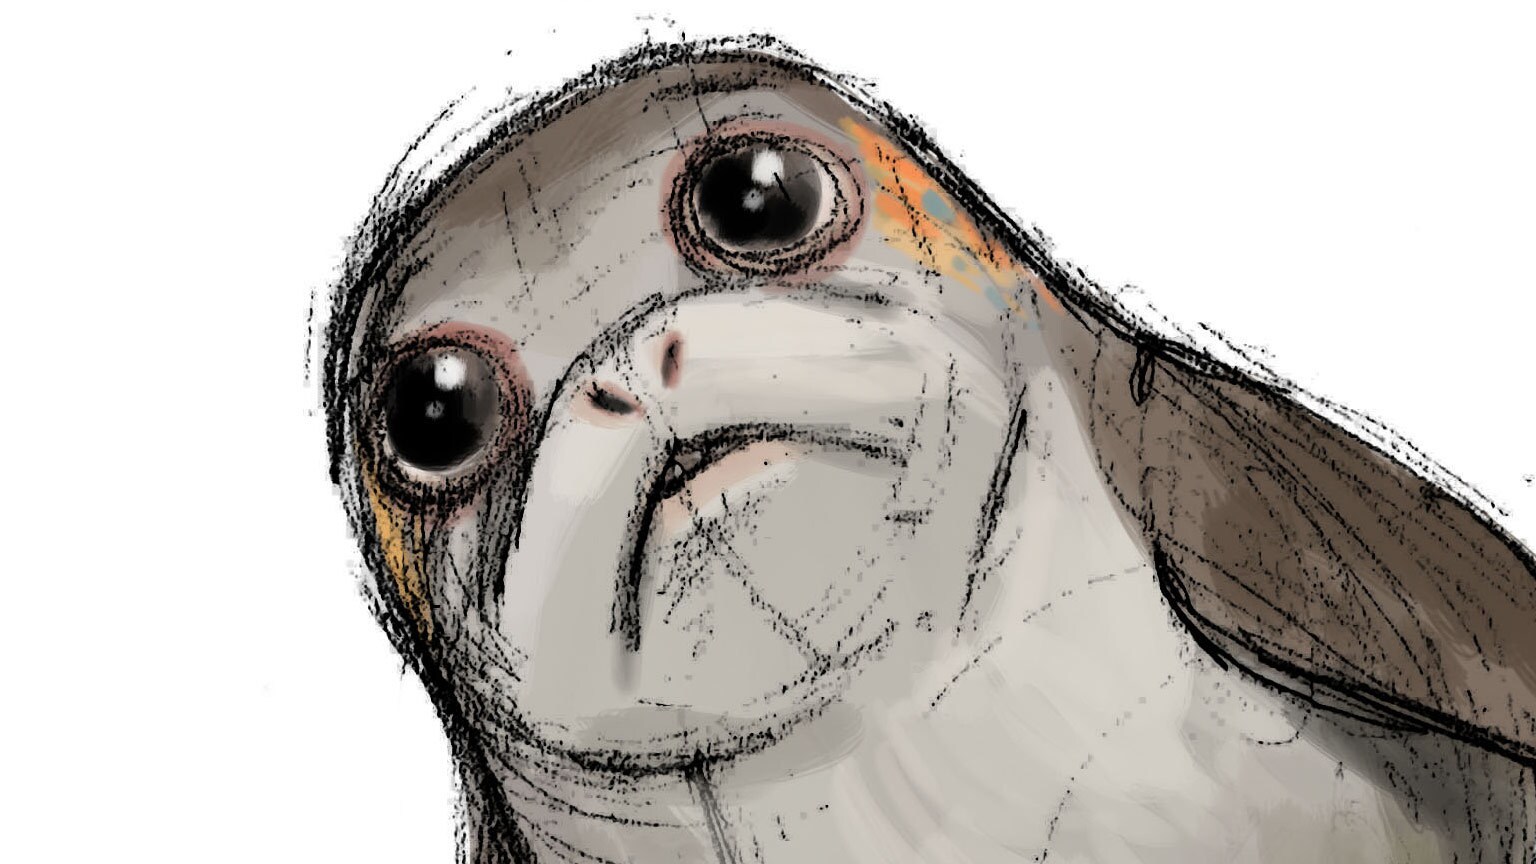 Introducing Porgs, the Cute New Creatures from Star Wars: The Last ...